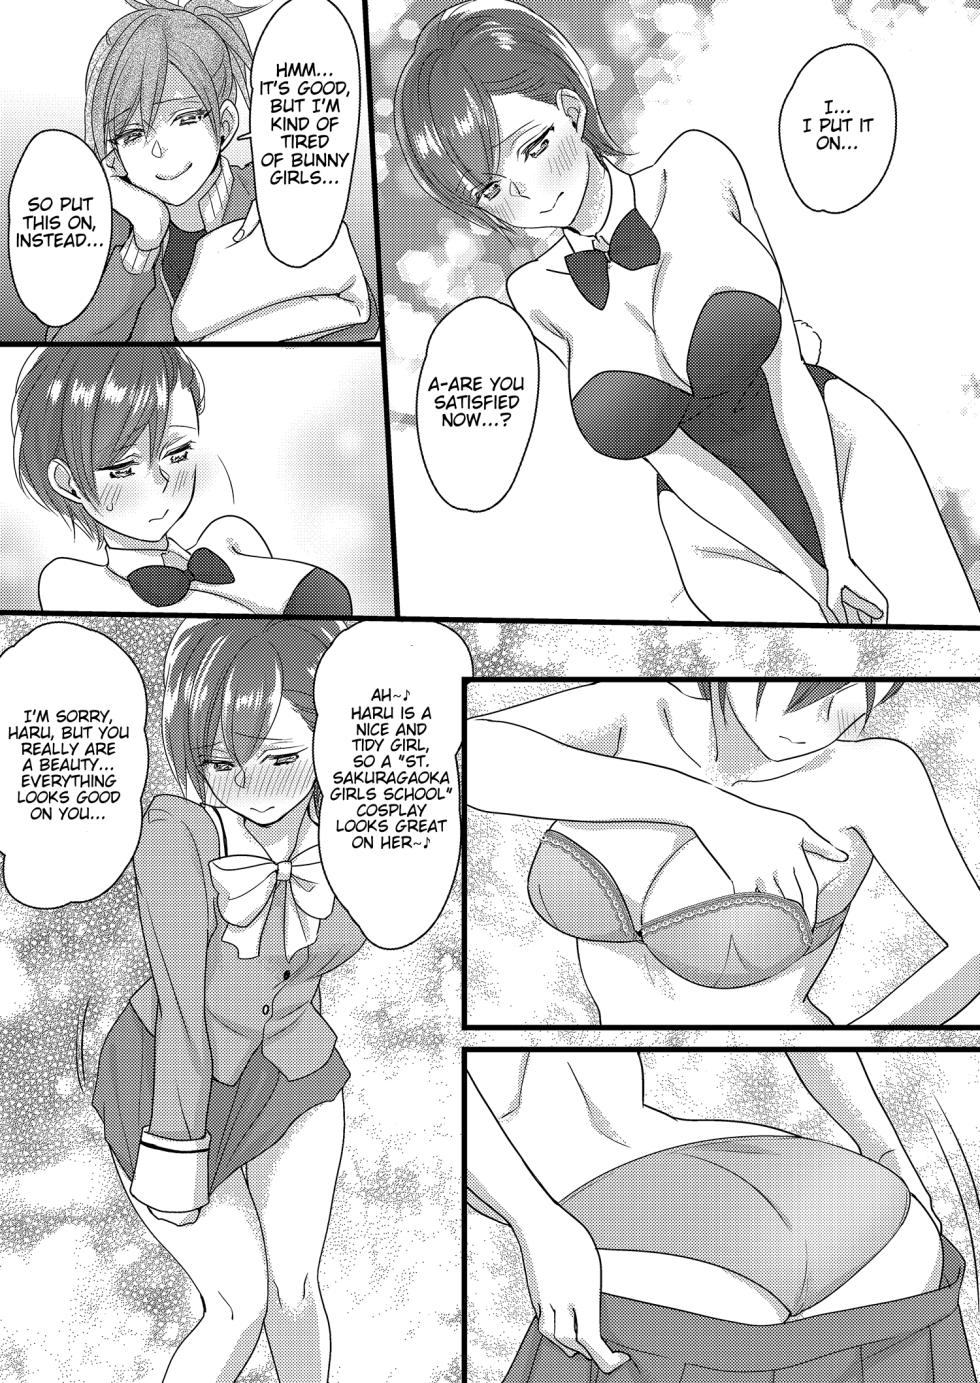 [Marialite (Lyna)] Haru to Sana 2 ～Love Connected Through Cosplay～[English] [Mikodayo] - Page 27